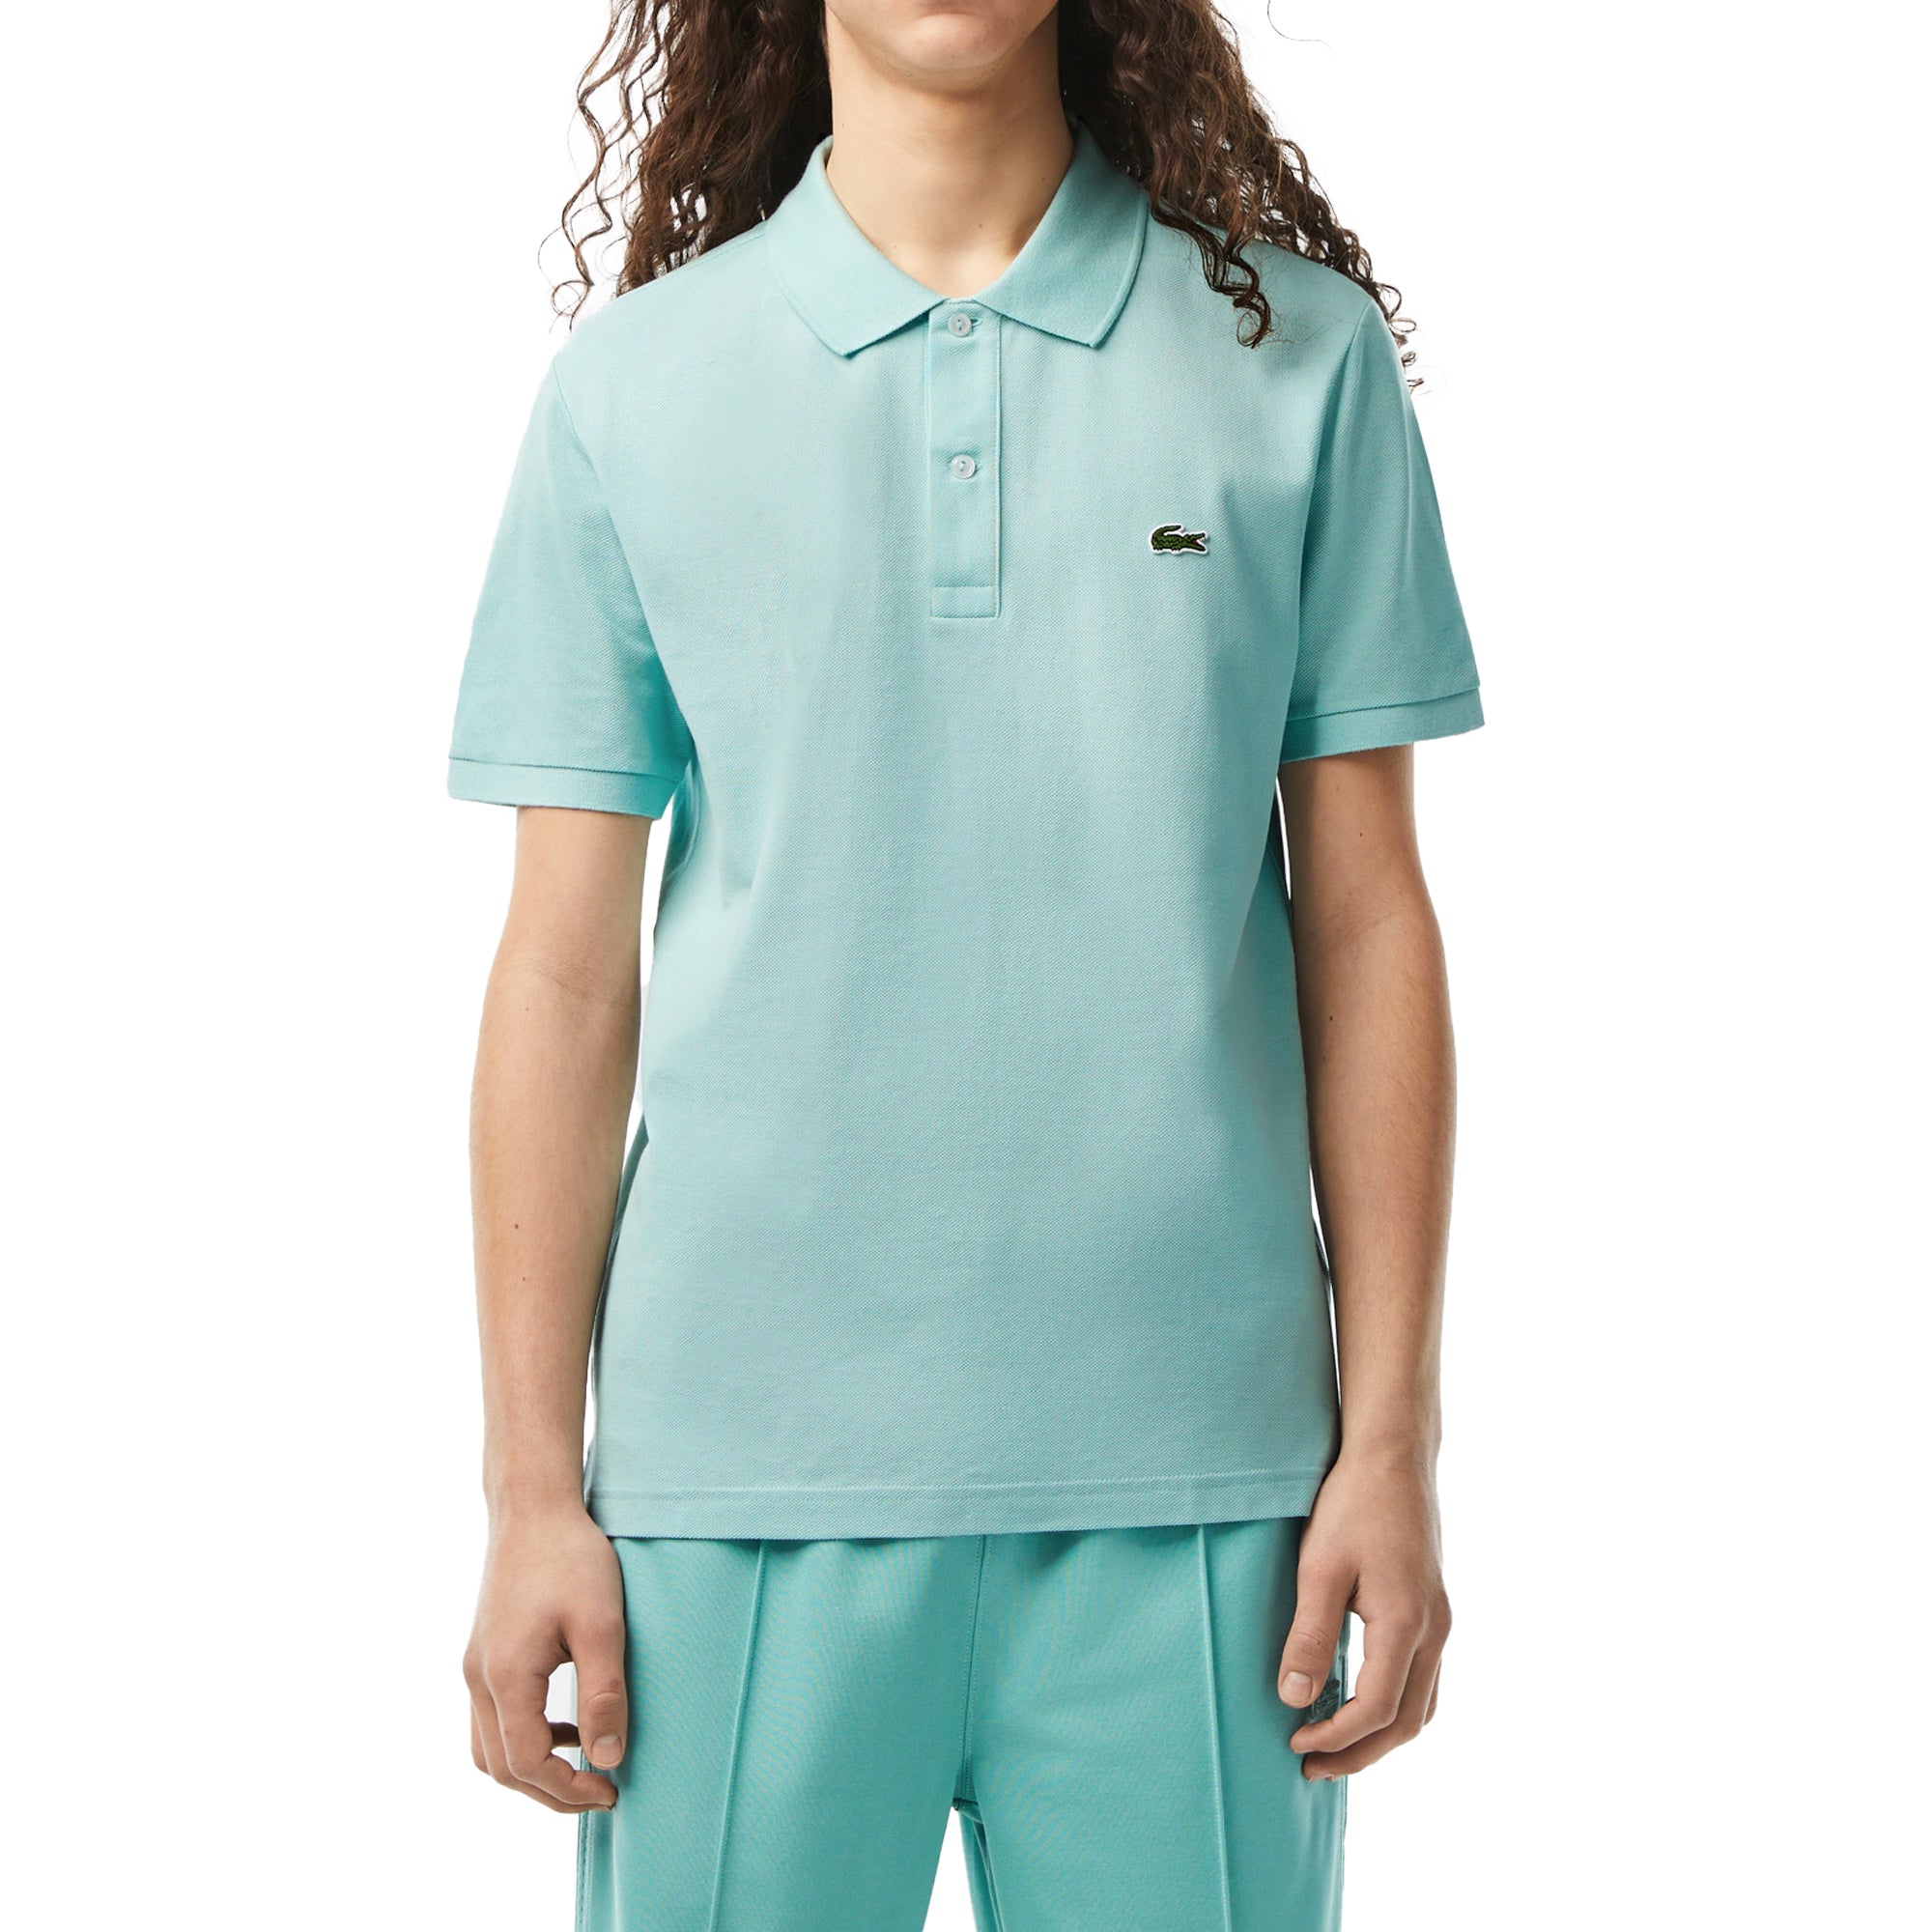 Lacoste Short Sleeved Slim Fit Polo PH4012 - Pastille Mint